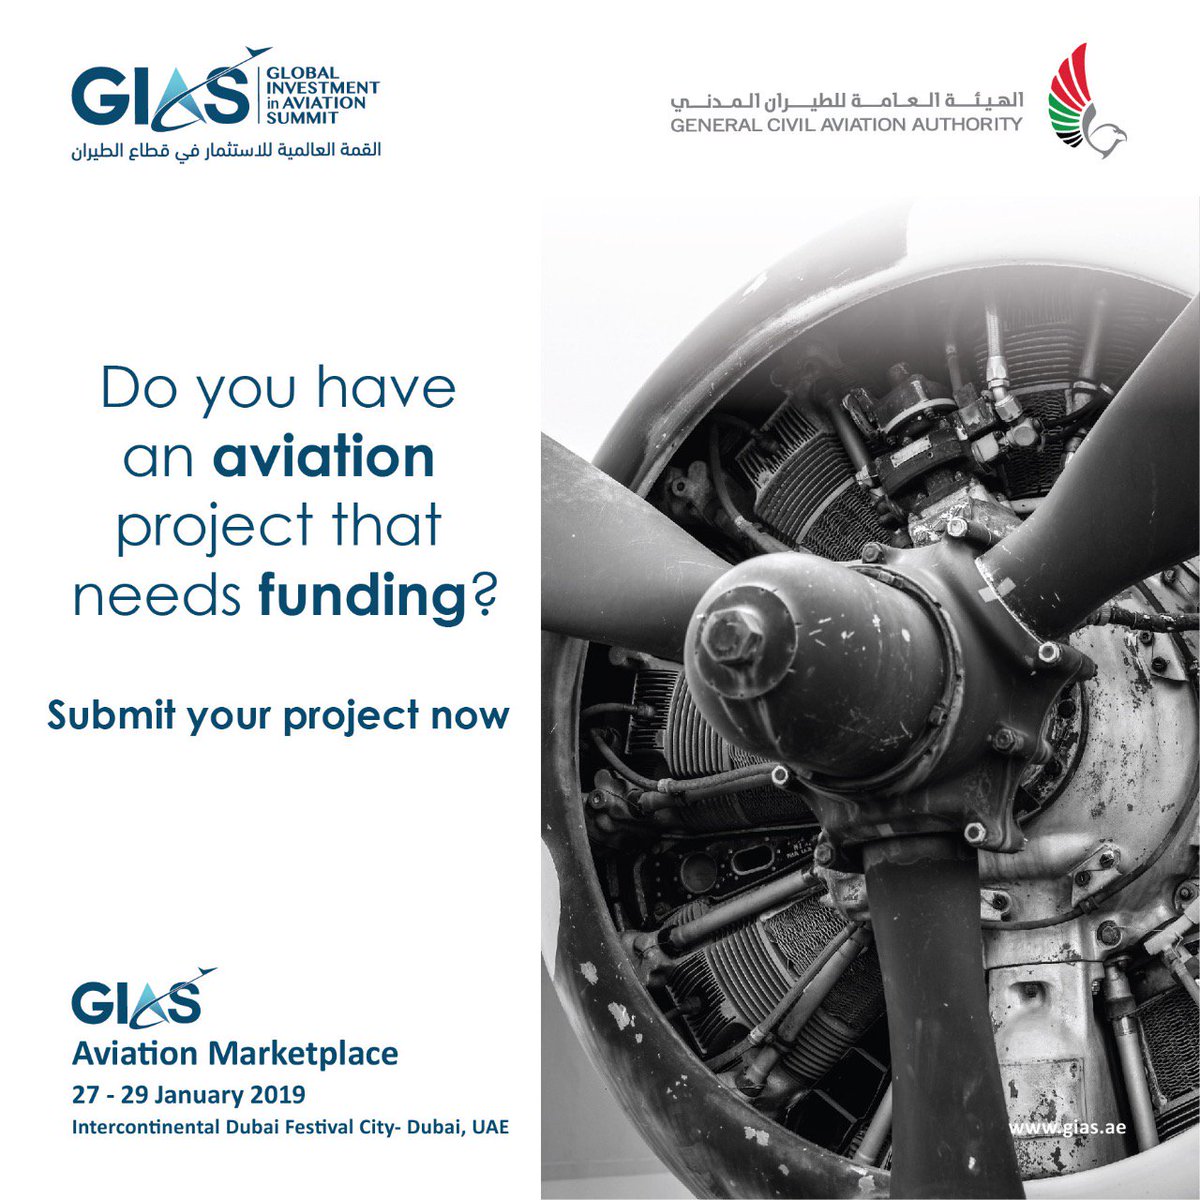 Do you have an aviation project that needs funding? Submit your project now at gias.ae #aviation #aircraft #global #investment #investor #business #Network #opportunity #expand #startup #UAE #GIAS19 #grow #aviationmarket #avgeek #dubai #aircraft #airport #summit